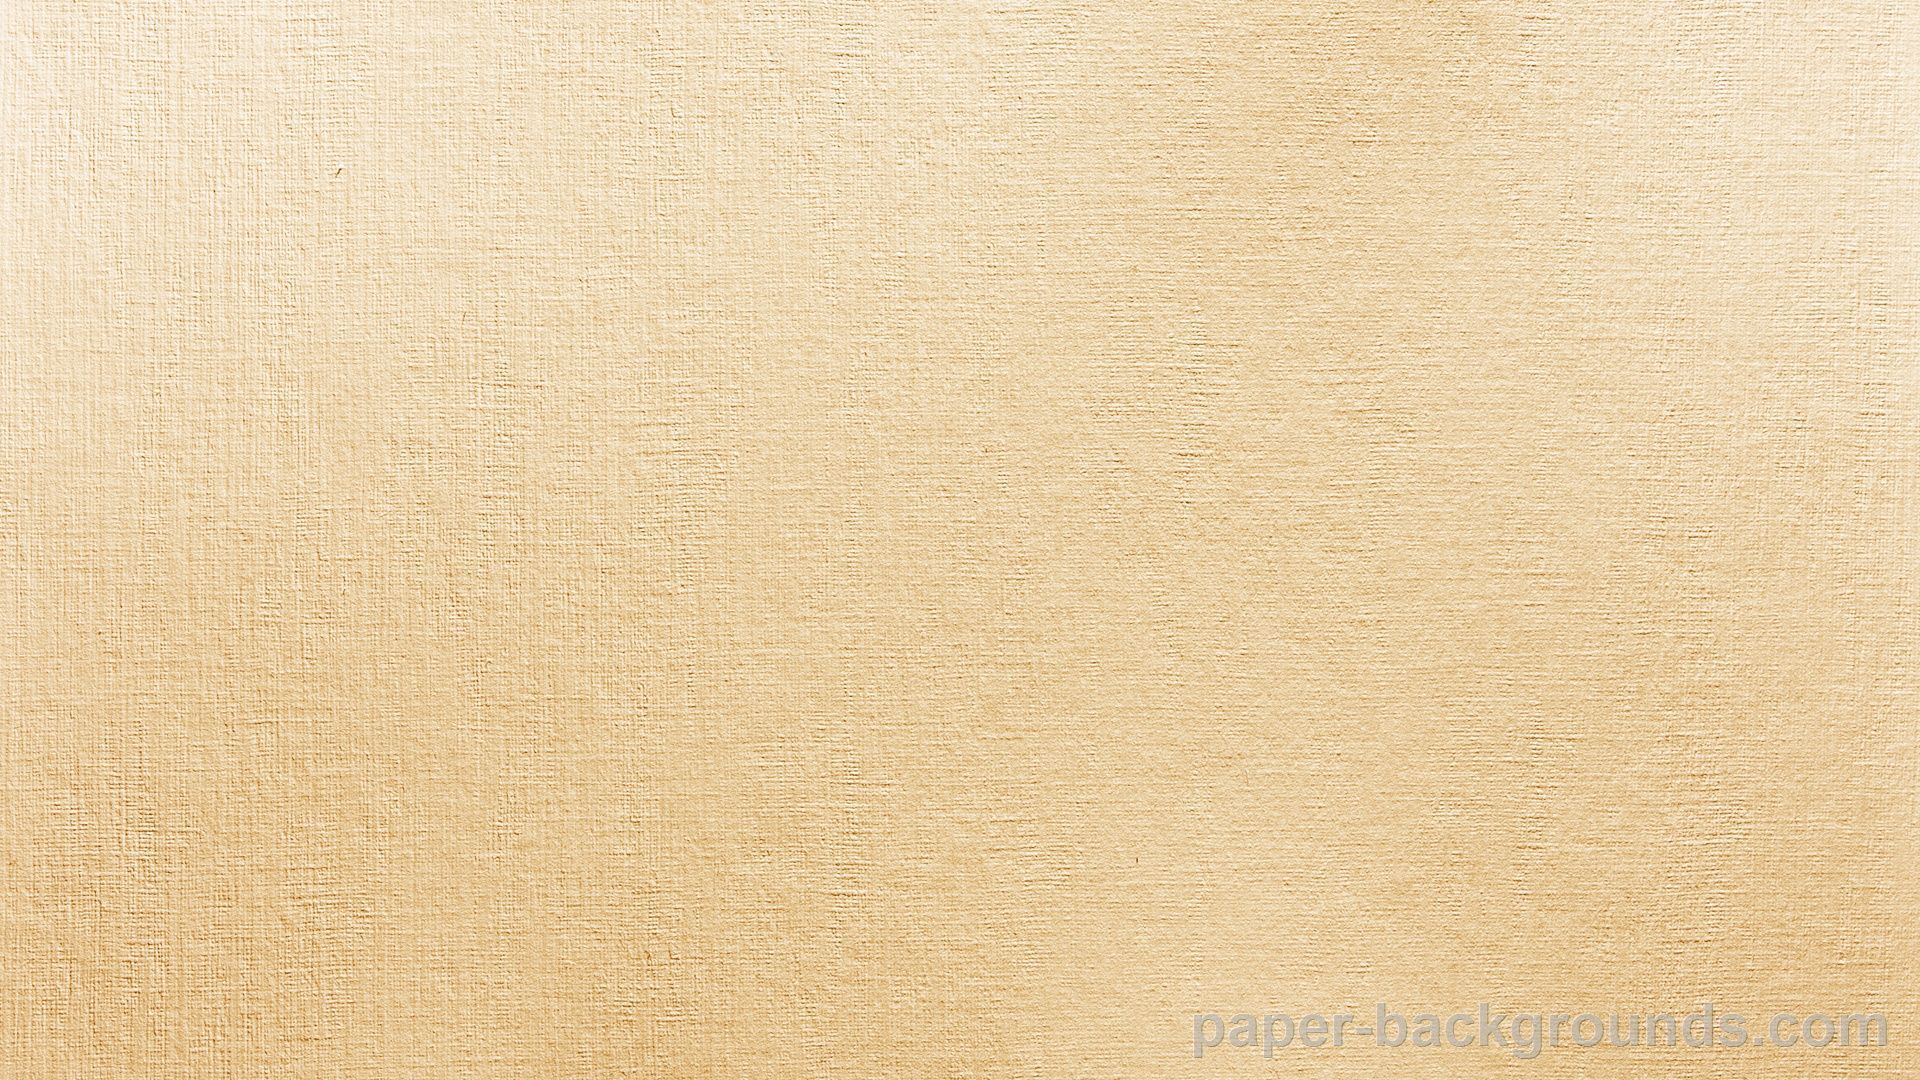 Natural-Paper-Background-Texture-Vintage-HD | Paper Backgrounds ...